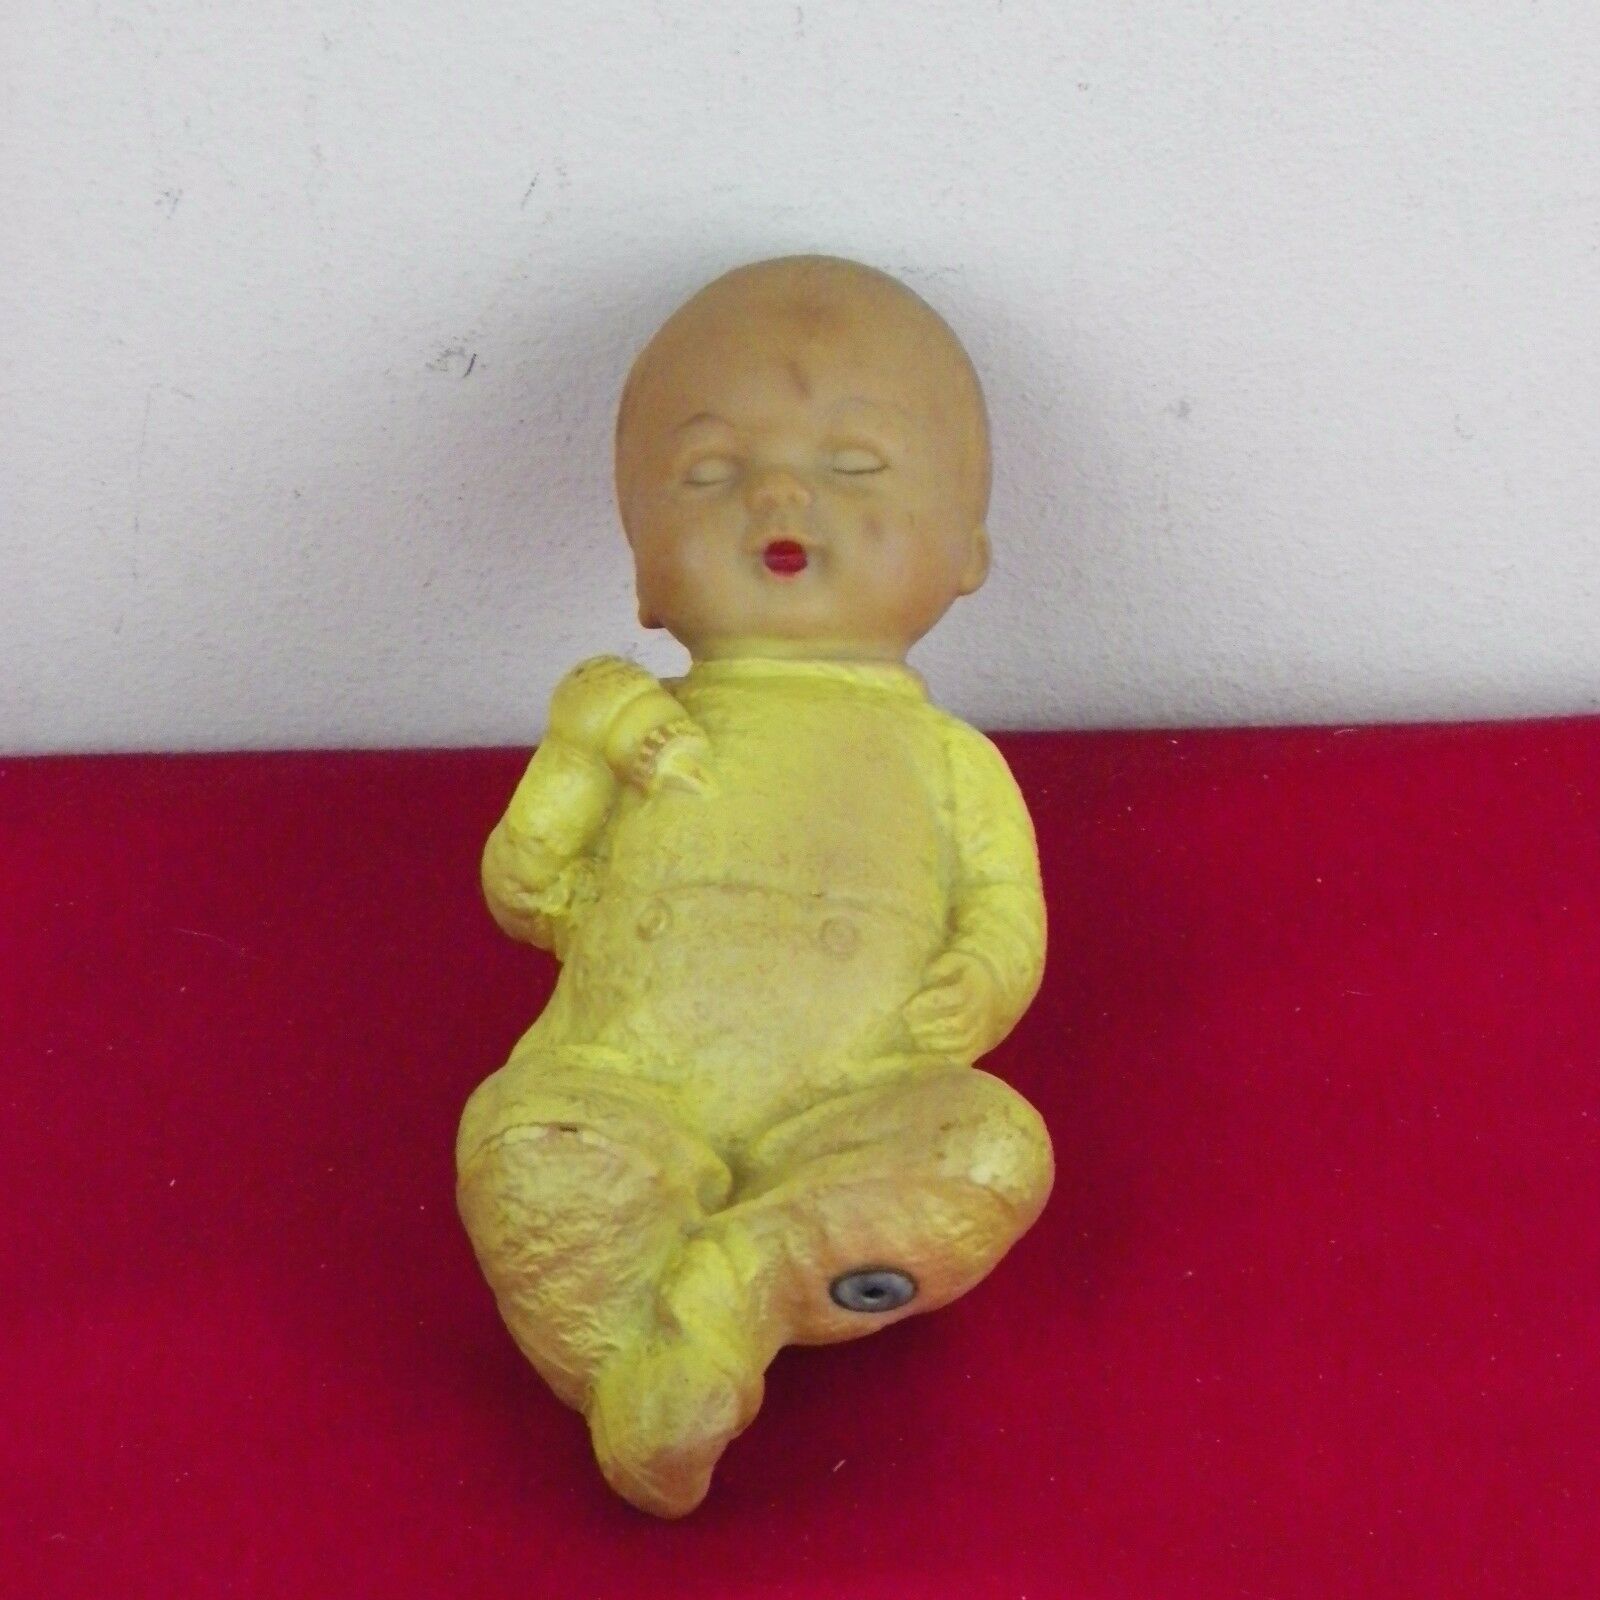 Vintage Rubber Doll Squeaker 8" Yellow Pajamas Works Baby Bottle